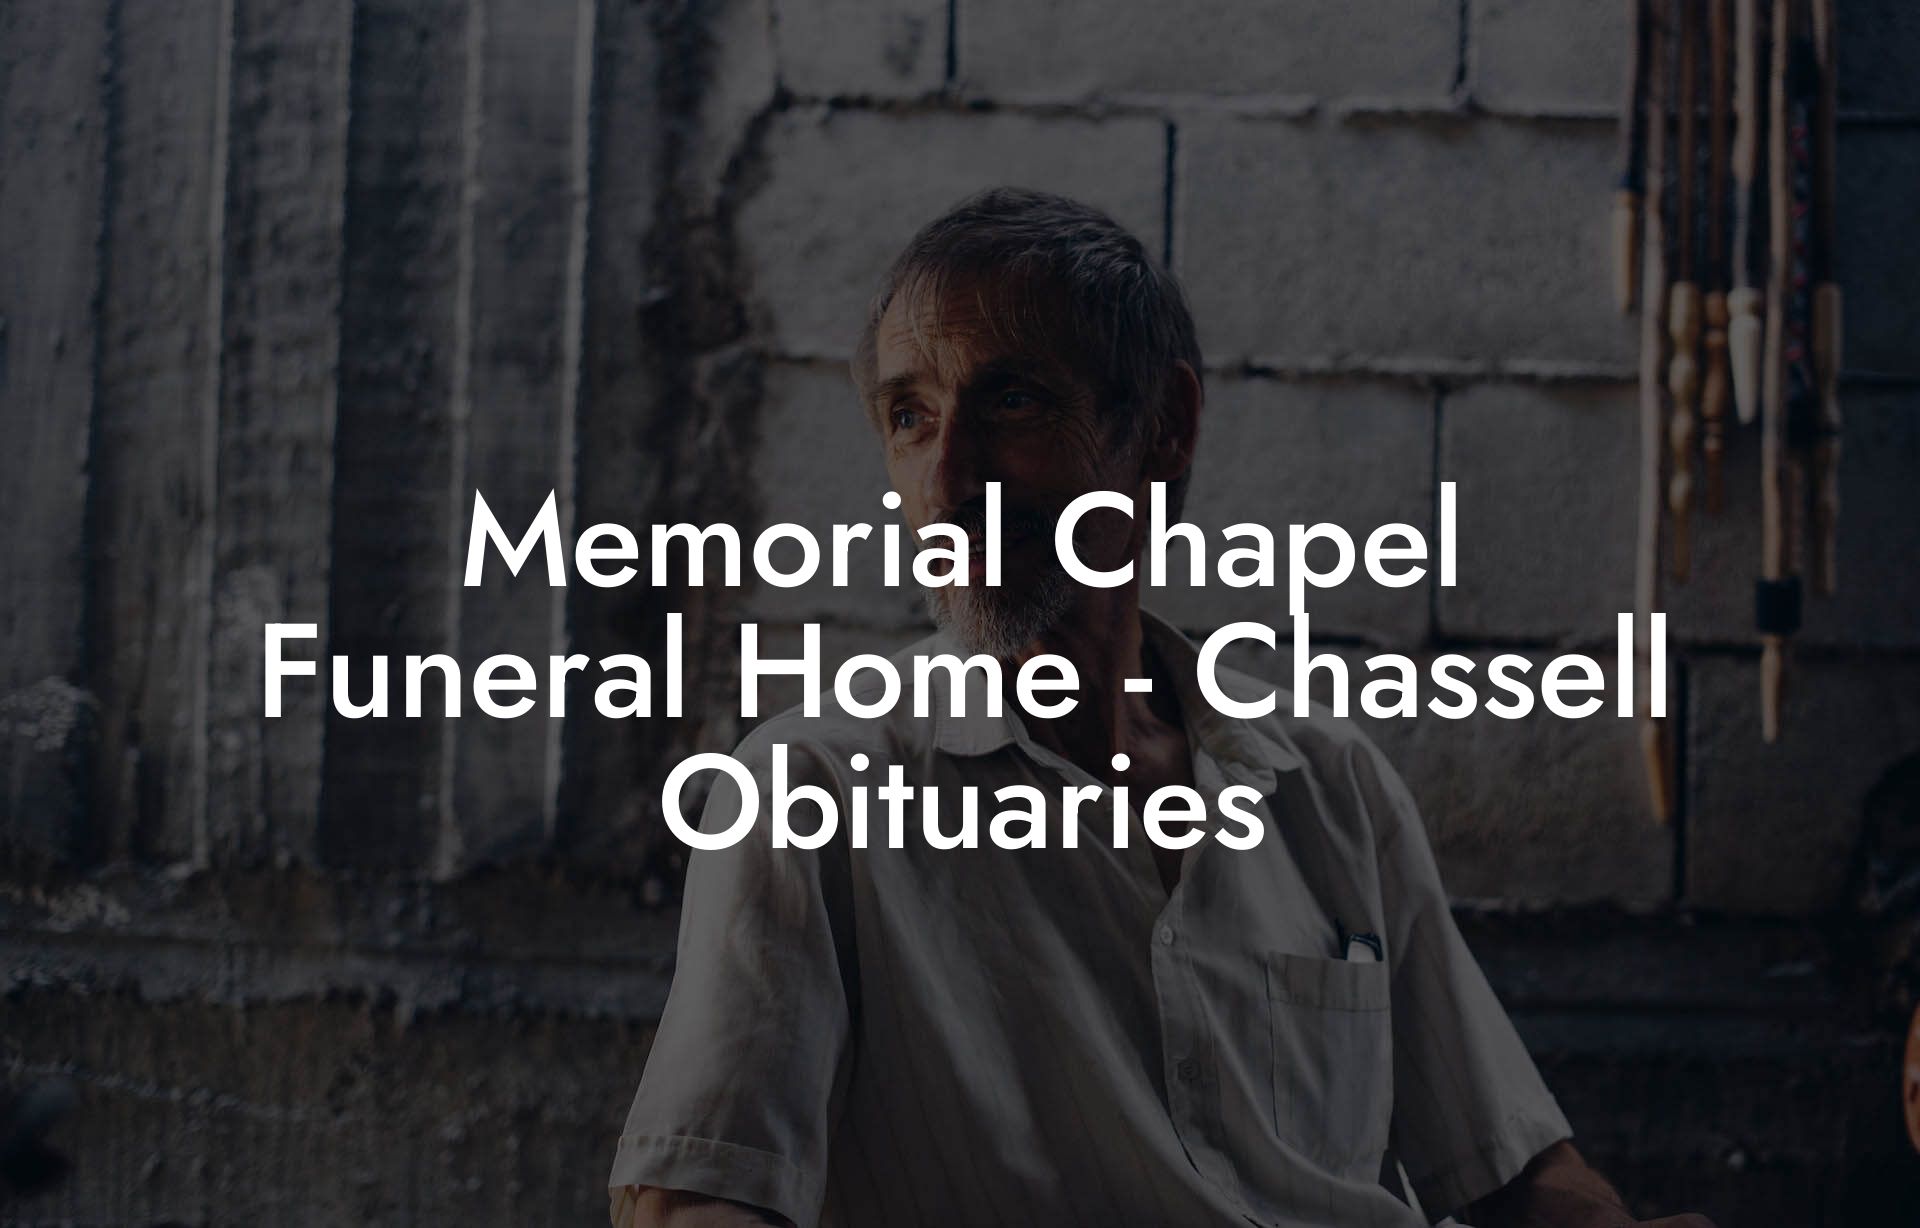 Memorial Chapel Funeral Home - Chassell Obituaries